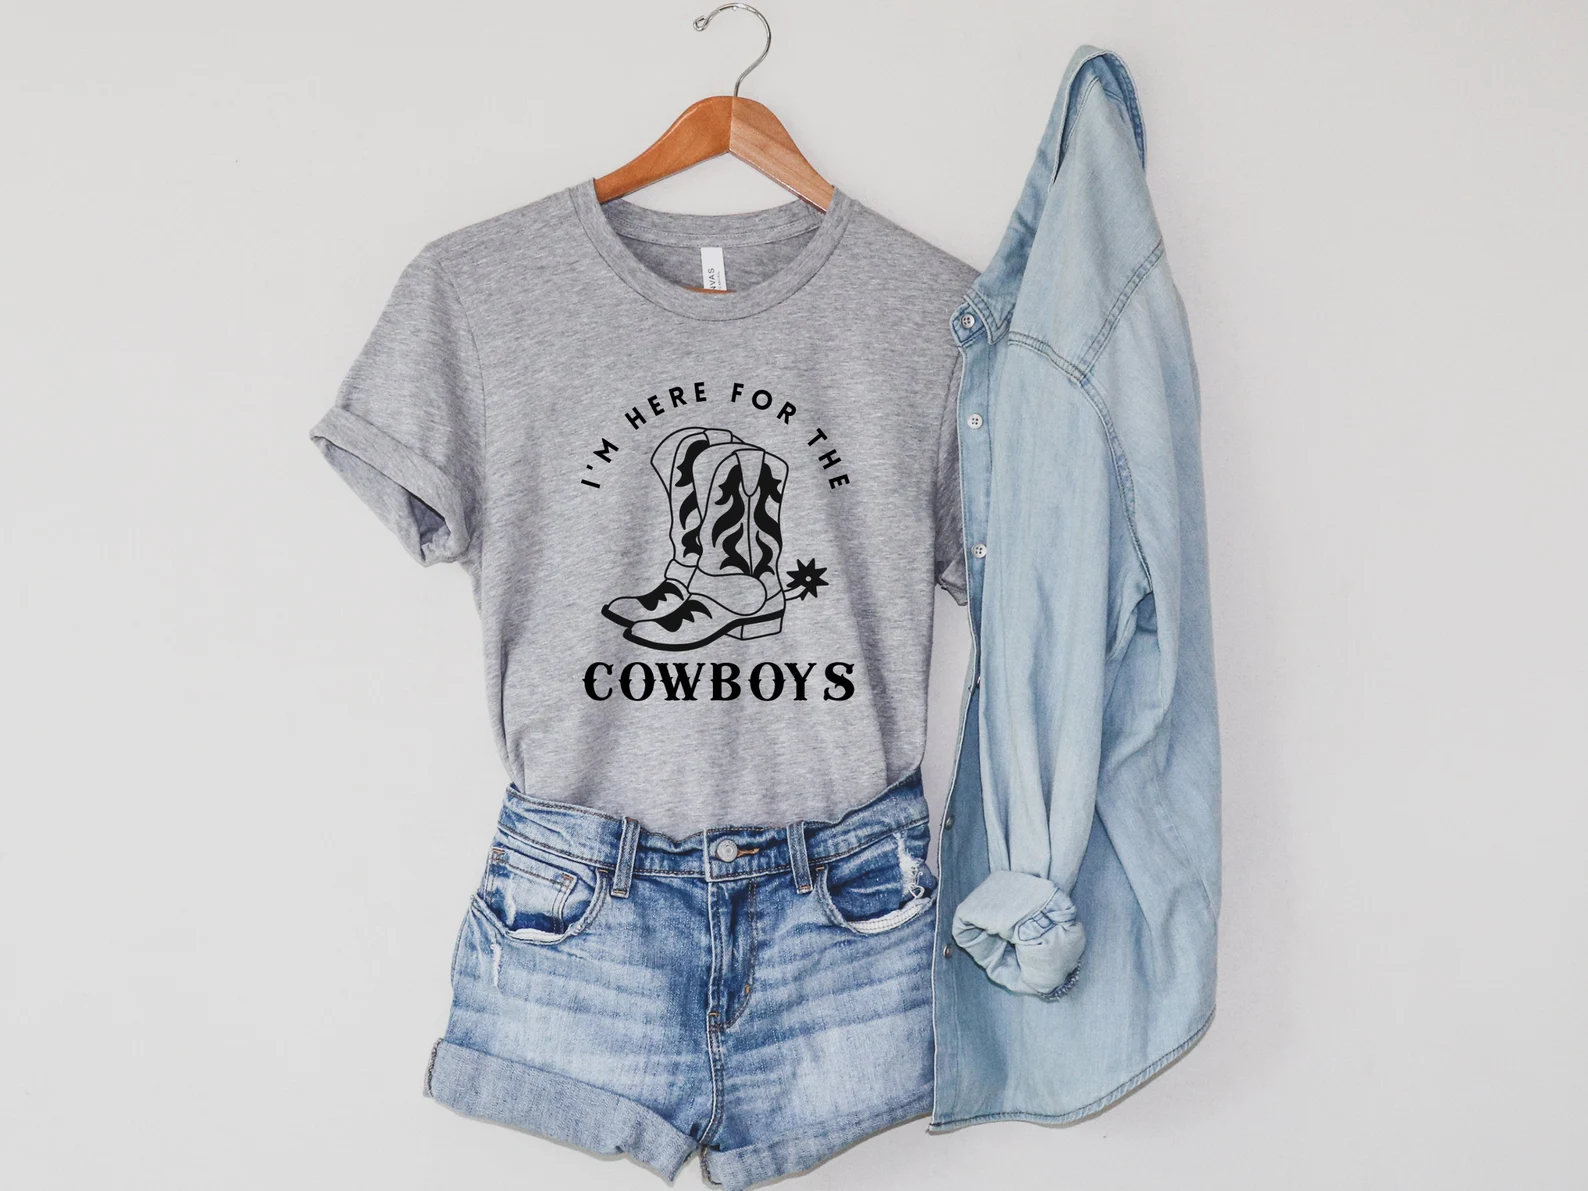 Grey t-shirt with cowboy boots.